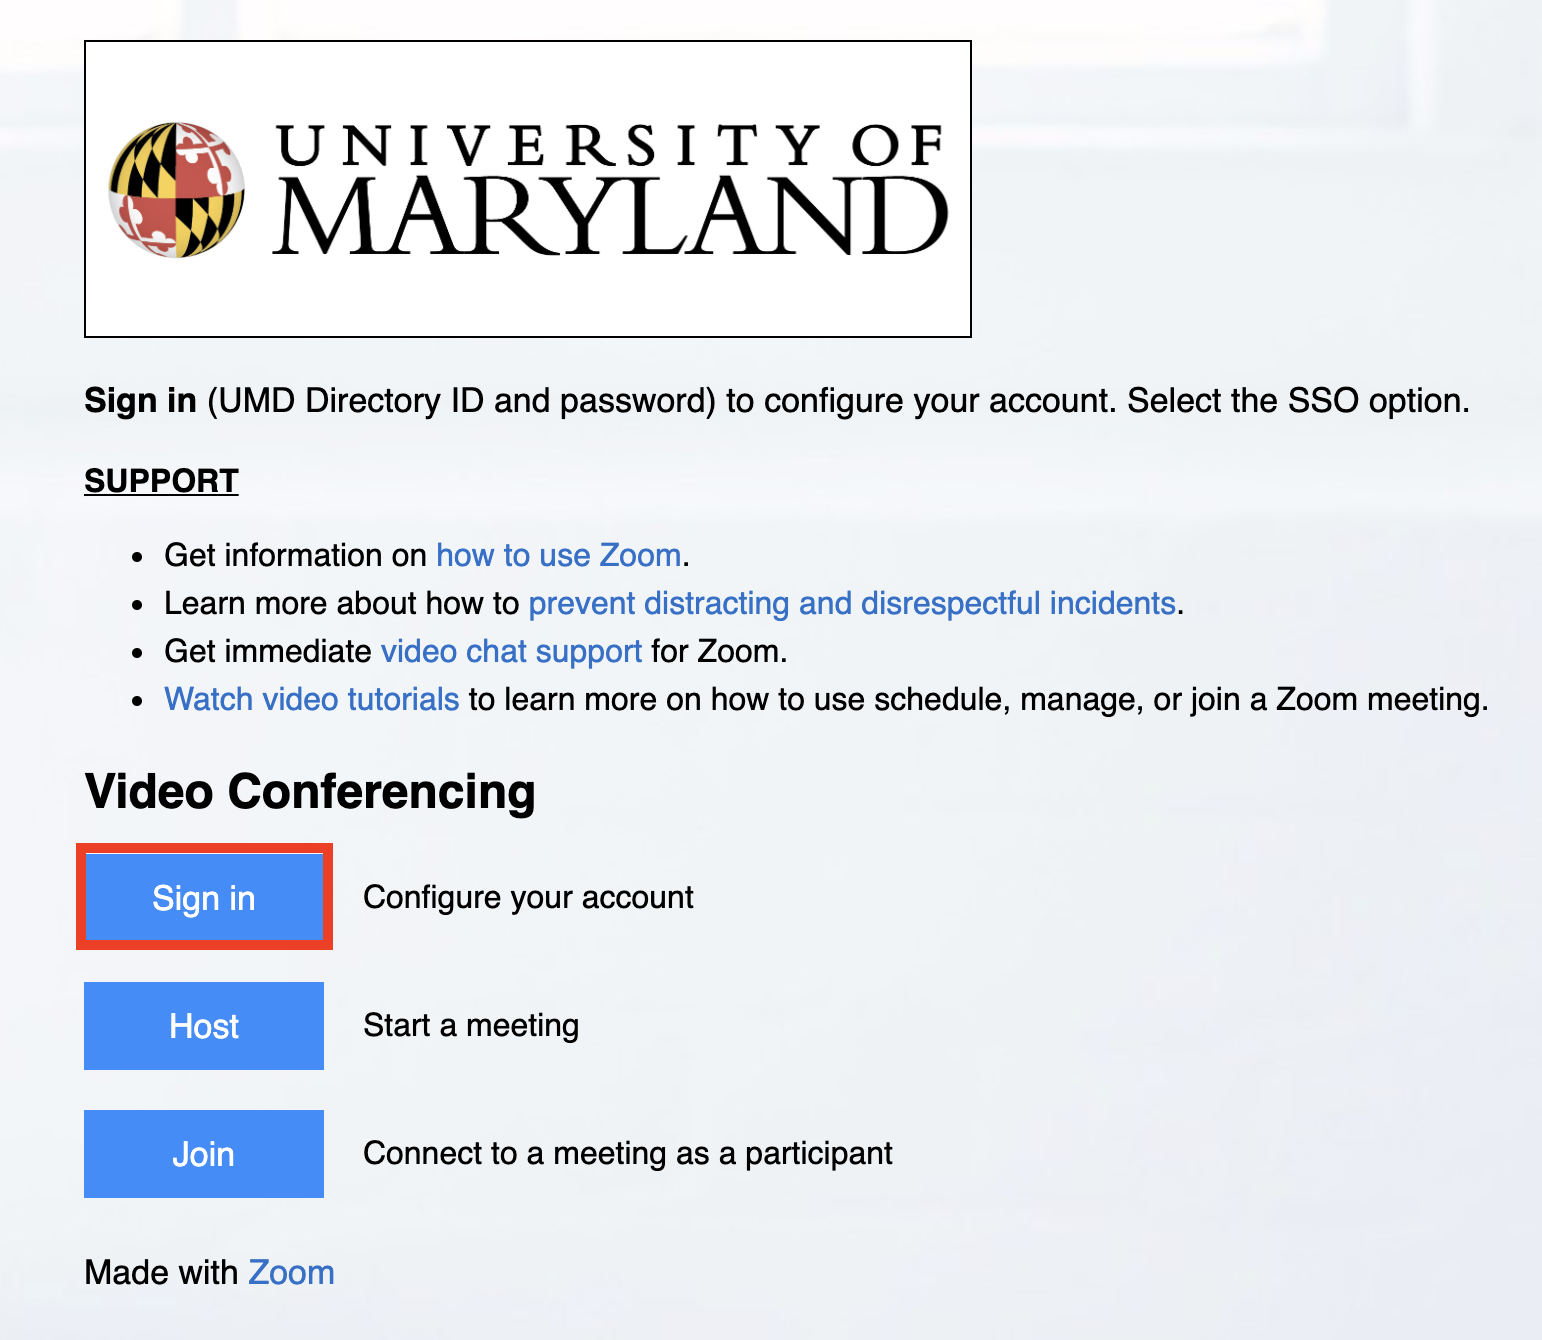 University of Maryland Zoom Video Conferencing page with the "Sign in" button highlighted.